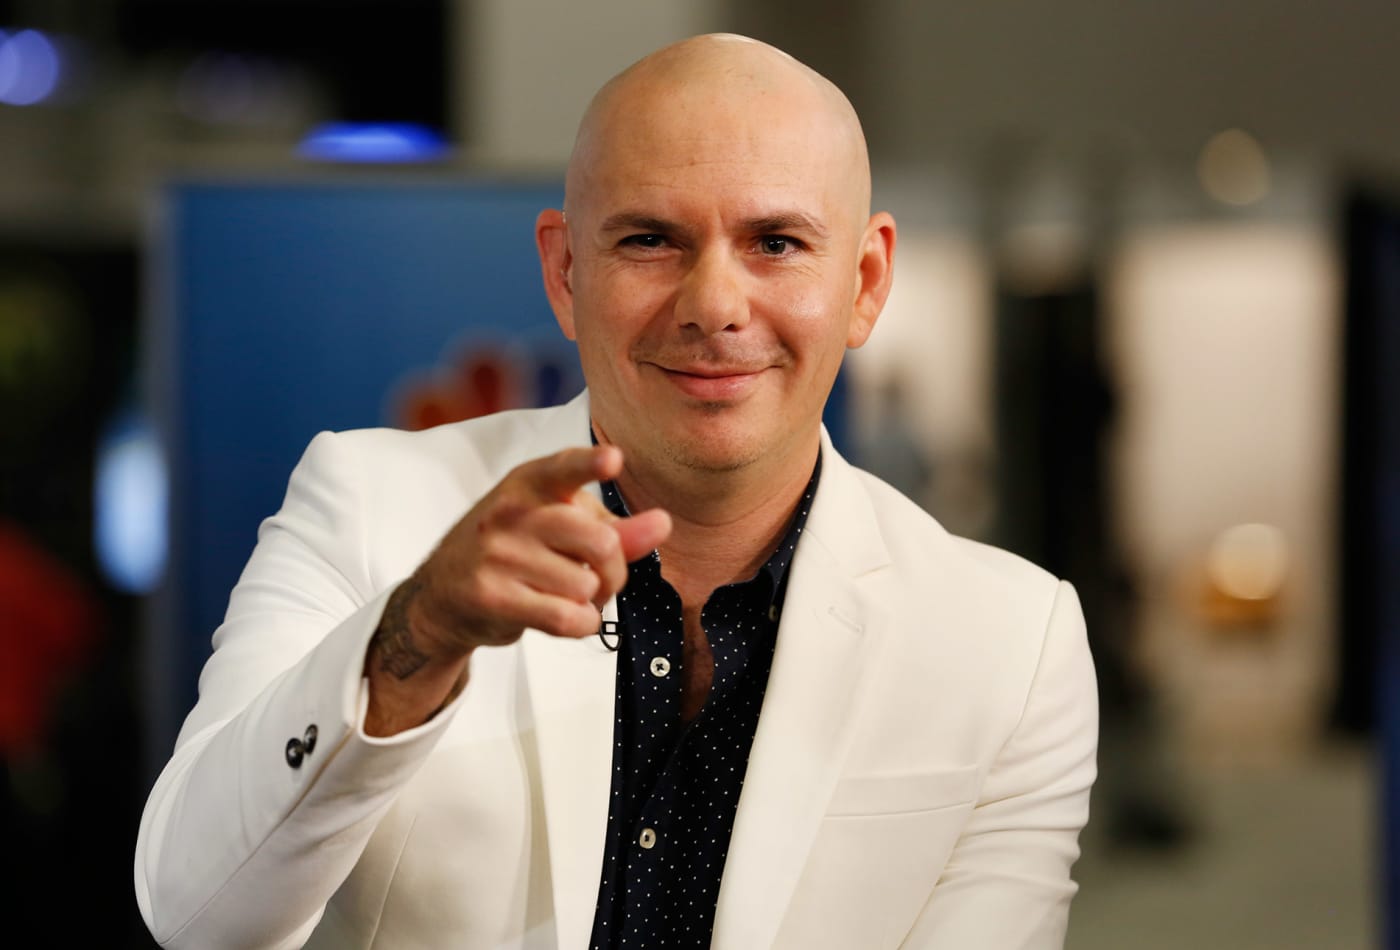 The top lesson Pitbull learned from Tony Robbins about success